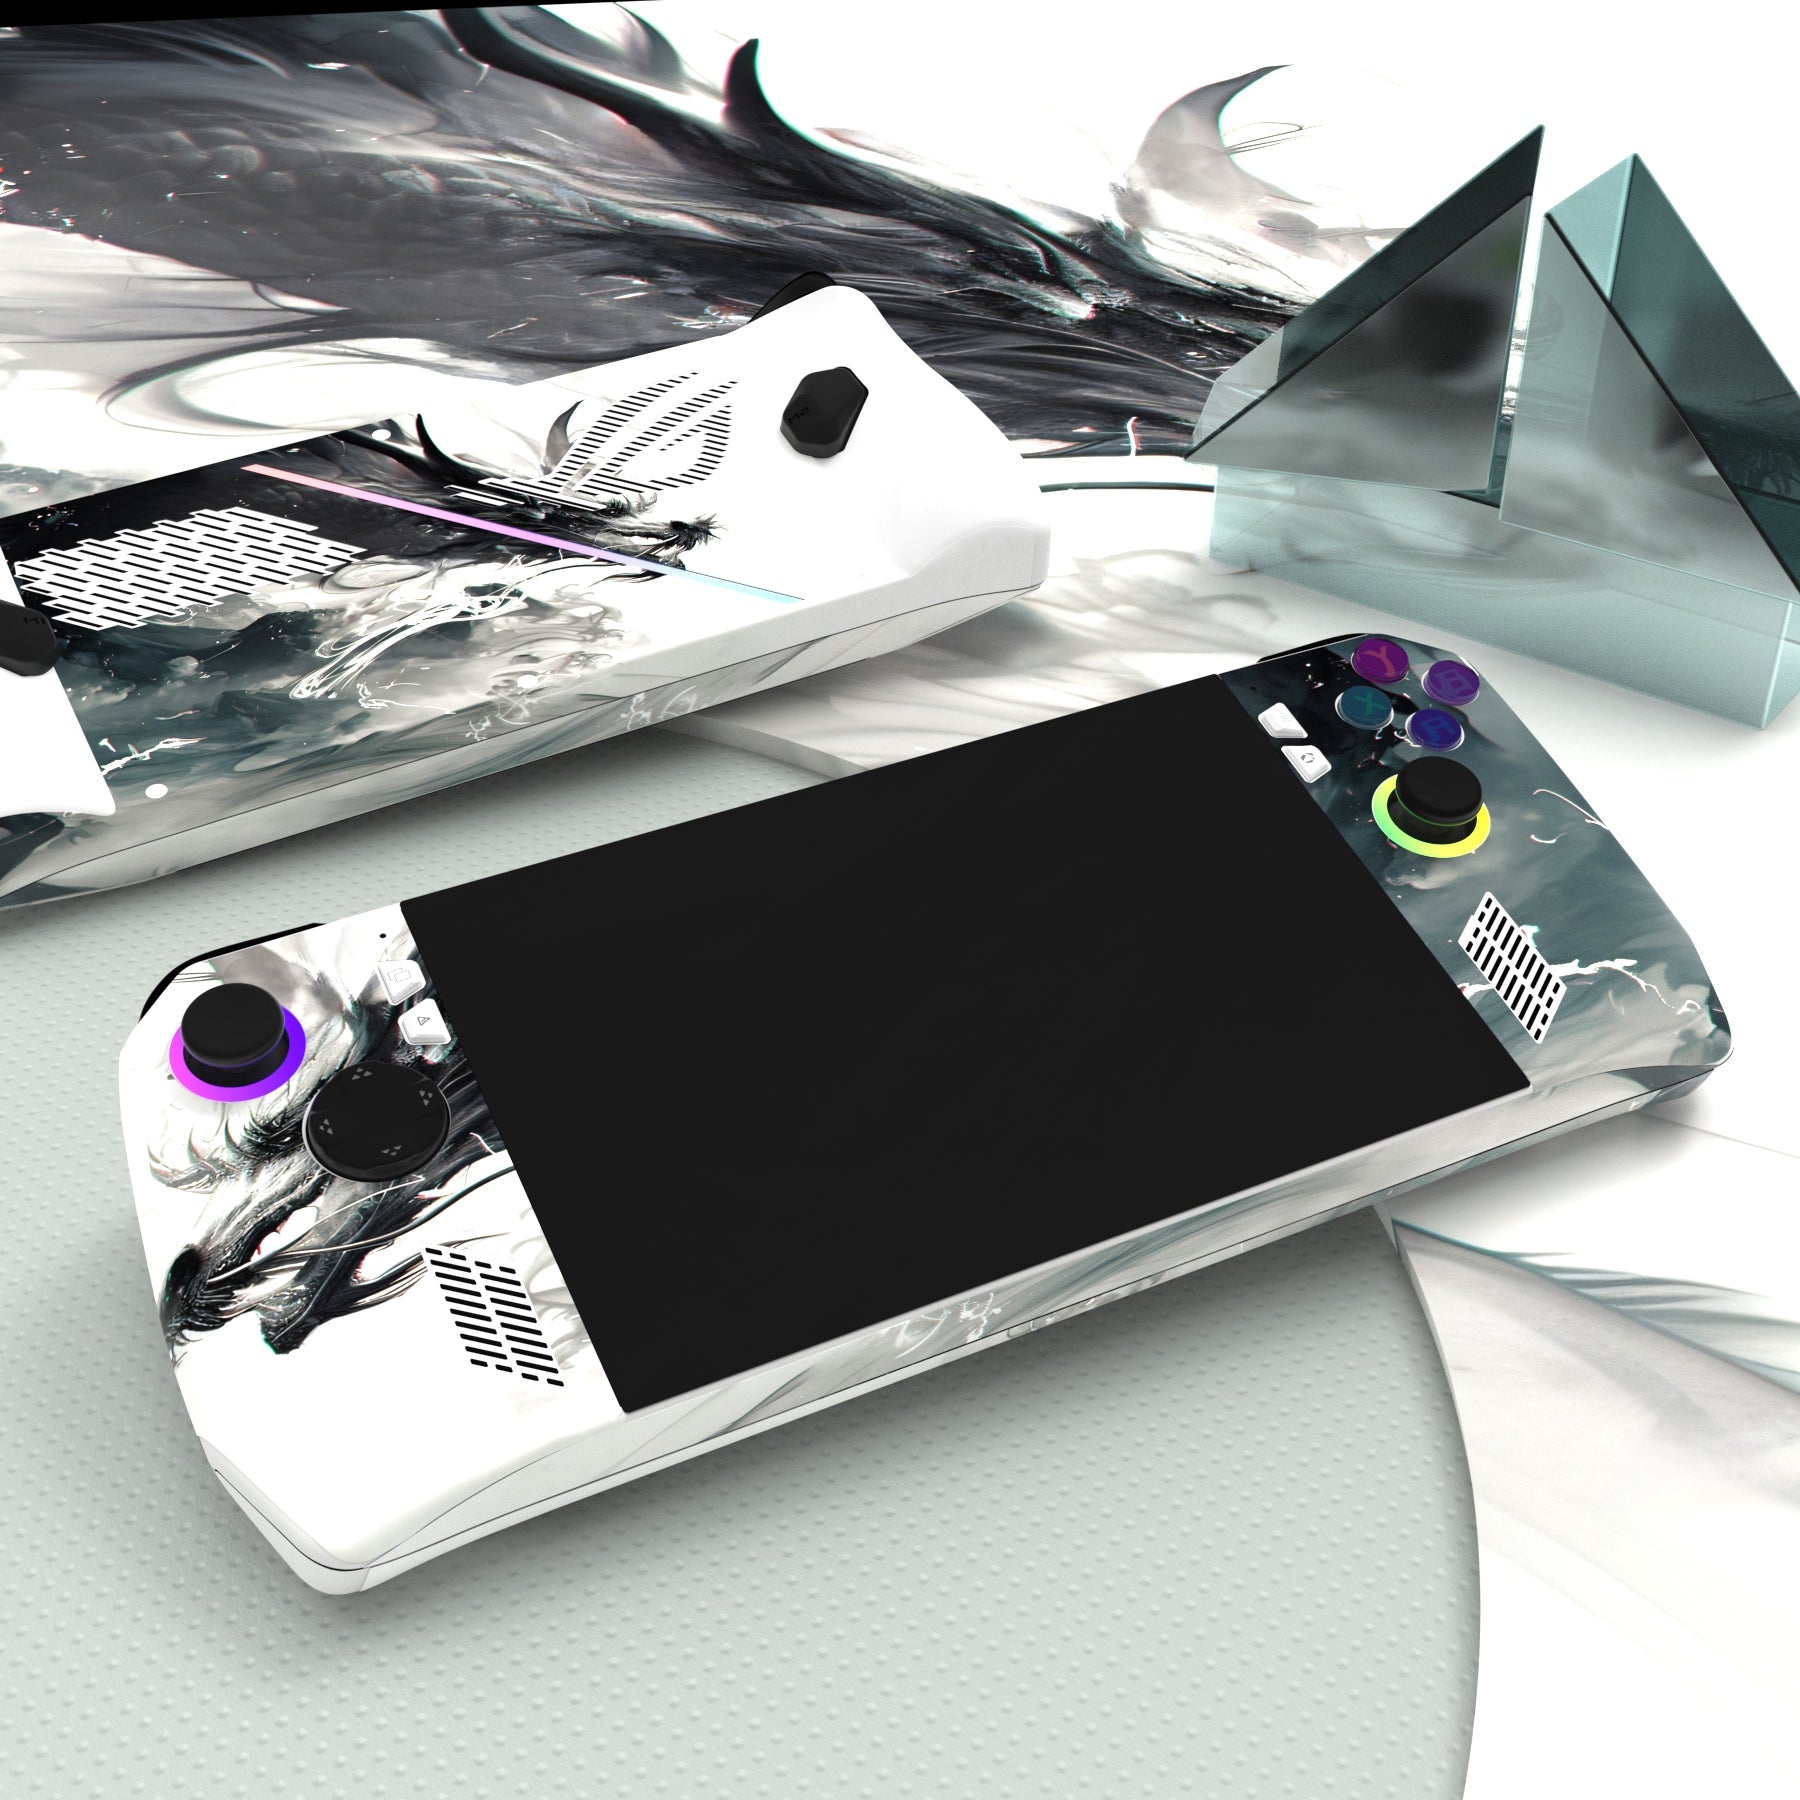 PlayVital Custom Stickers Vinyl Wraps Protective Skin Decal for ROG Ally Console - Ink Spirit Dragon - RGTM031 PlayVital